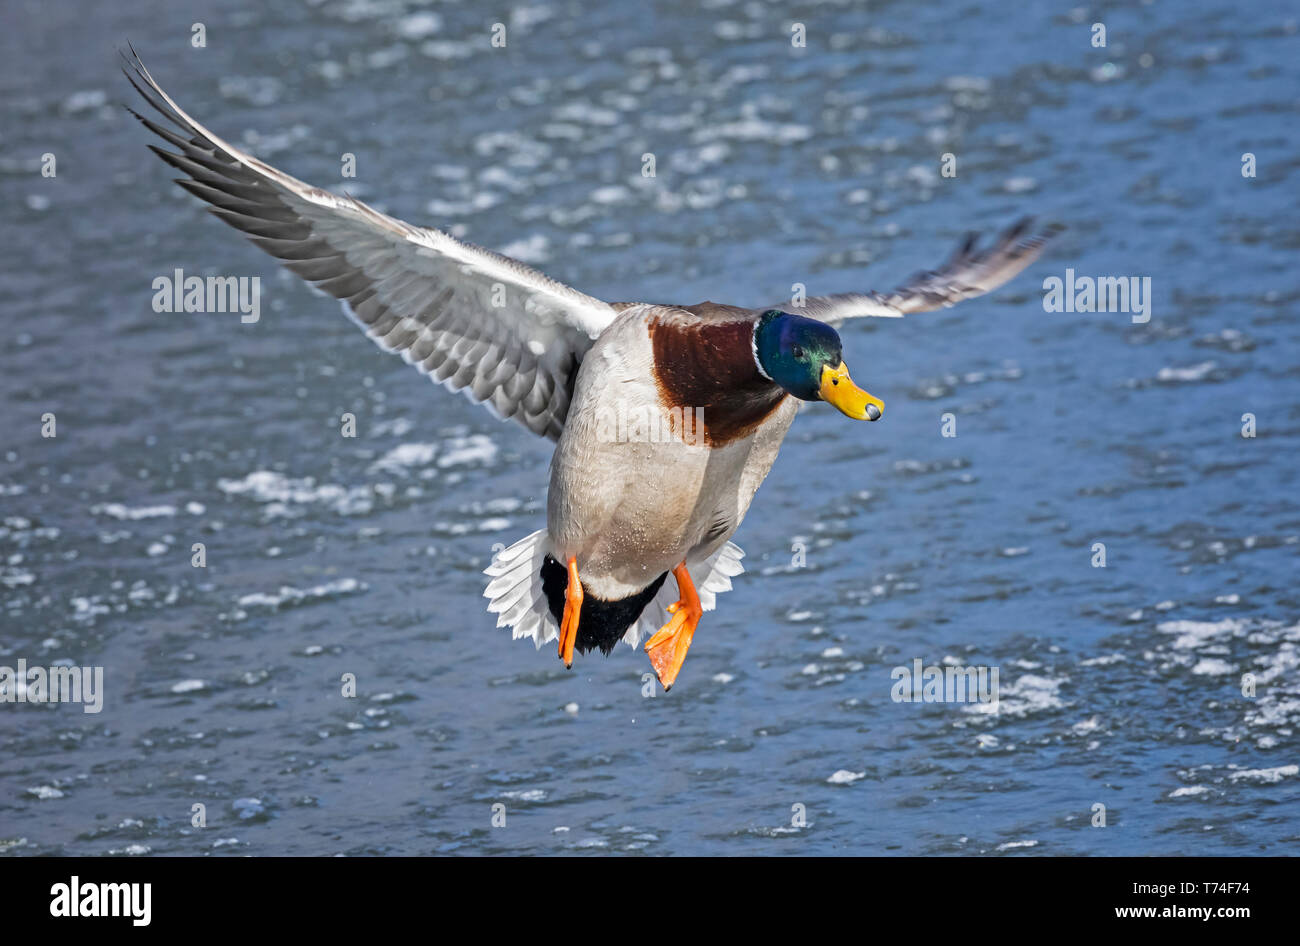 Male Mallard duck (Anas platyrhynchos) in flight over water; Fort Collins, Colorado, United States of America Stock Photo